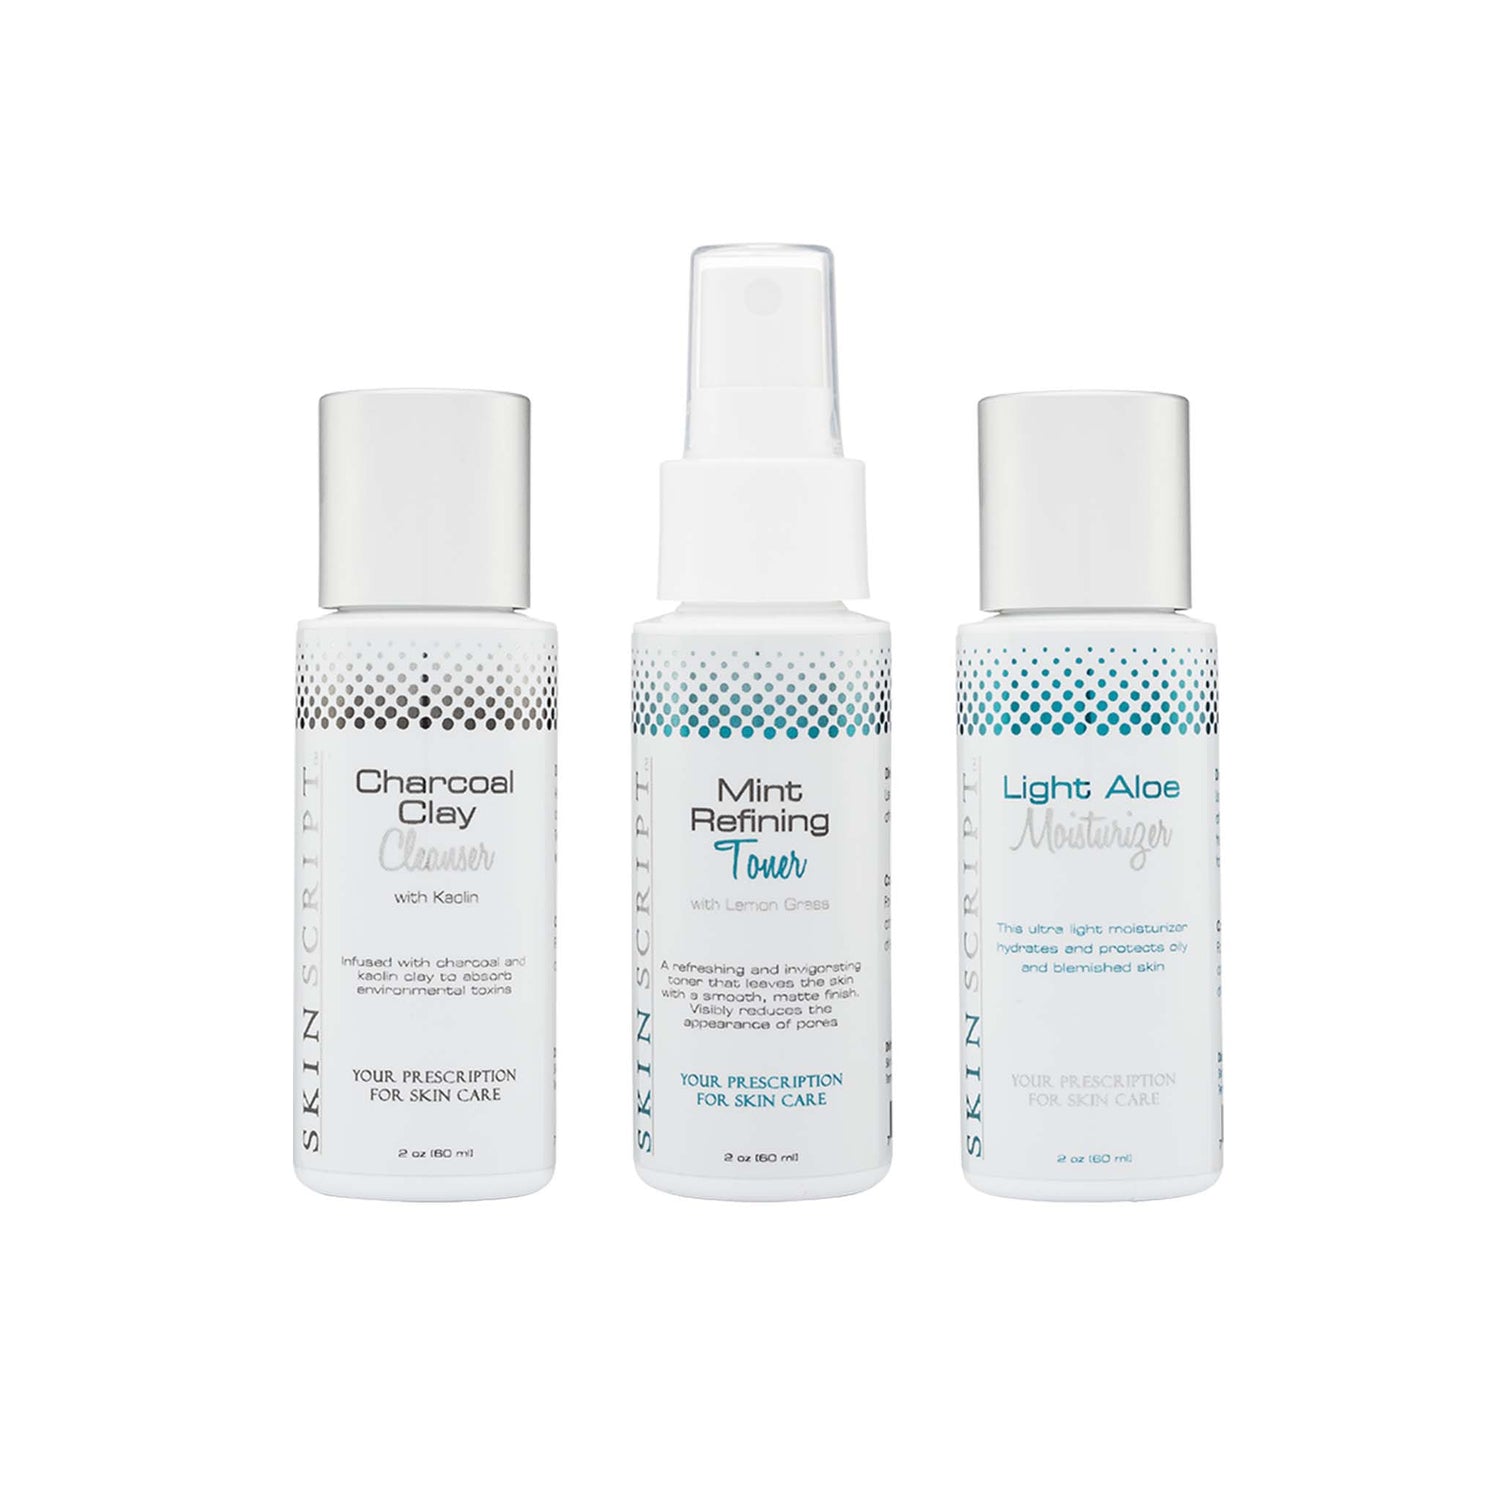 Skin Script Minimalist kit is a great start for a simple home routine to reduce occasional breakouts and reduce oily skin.